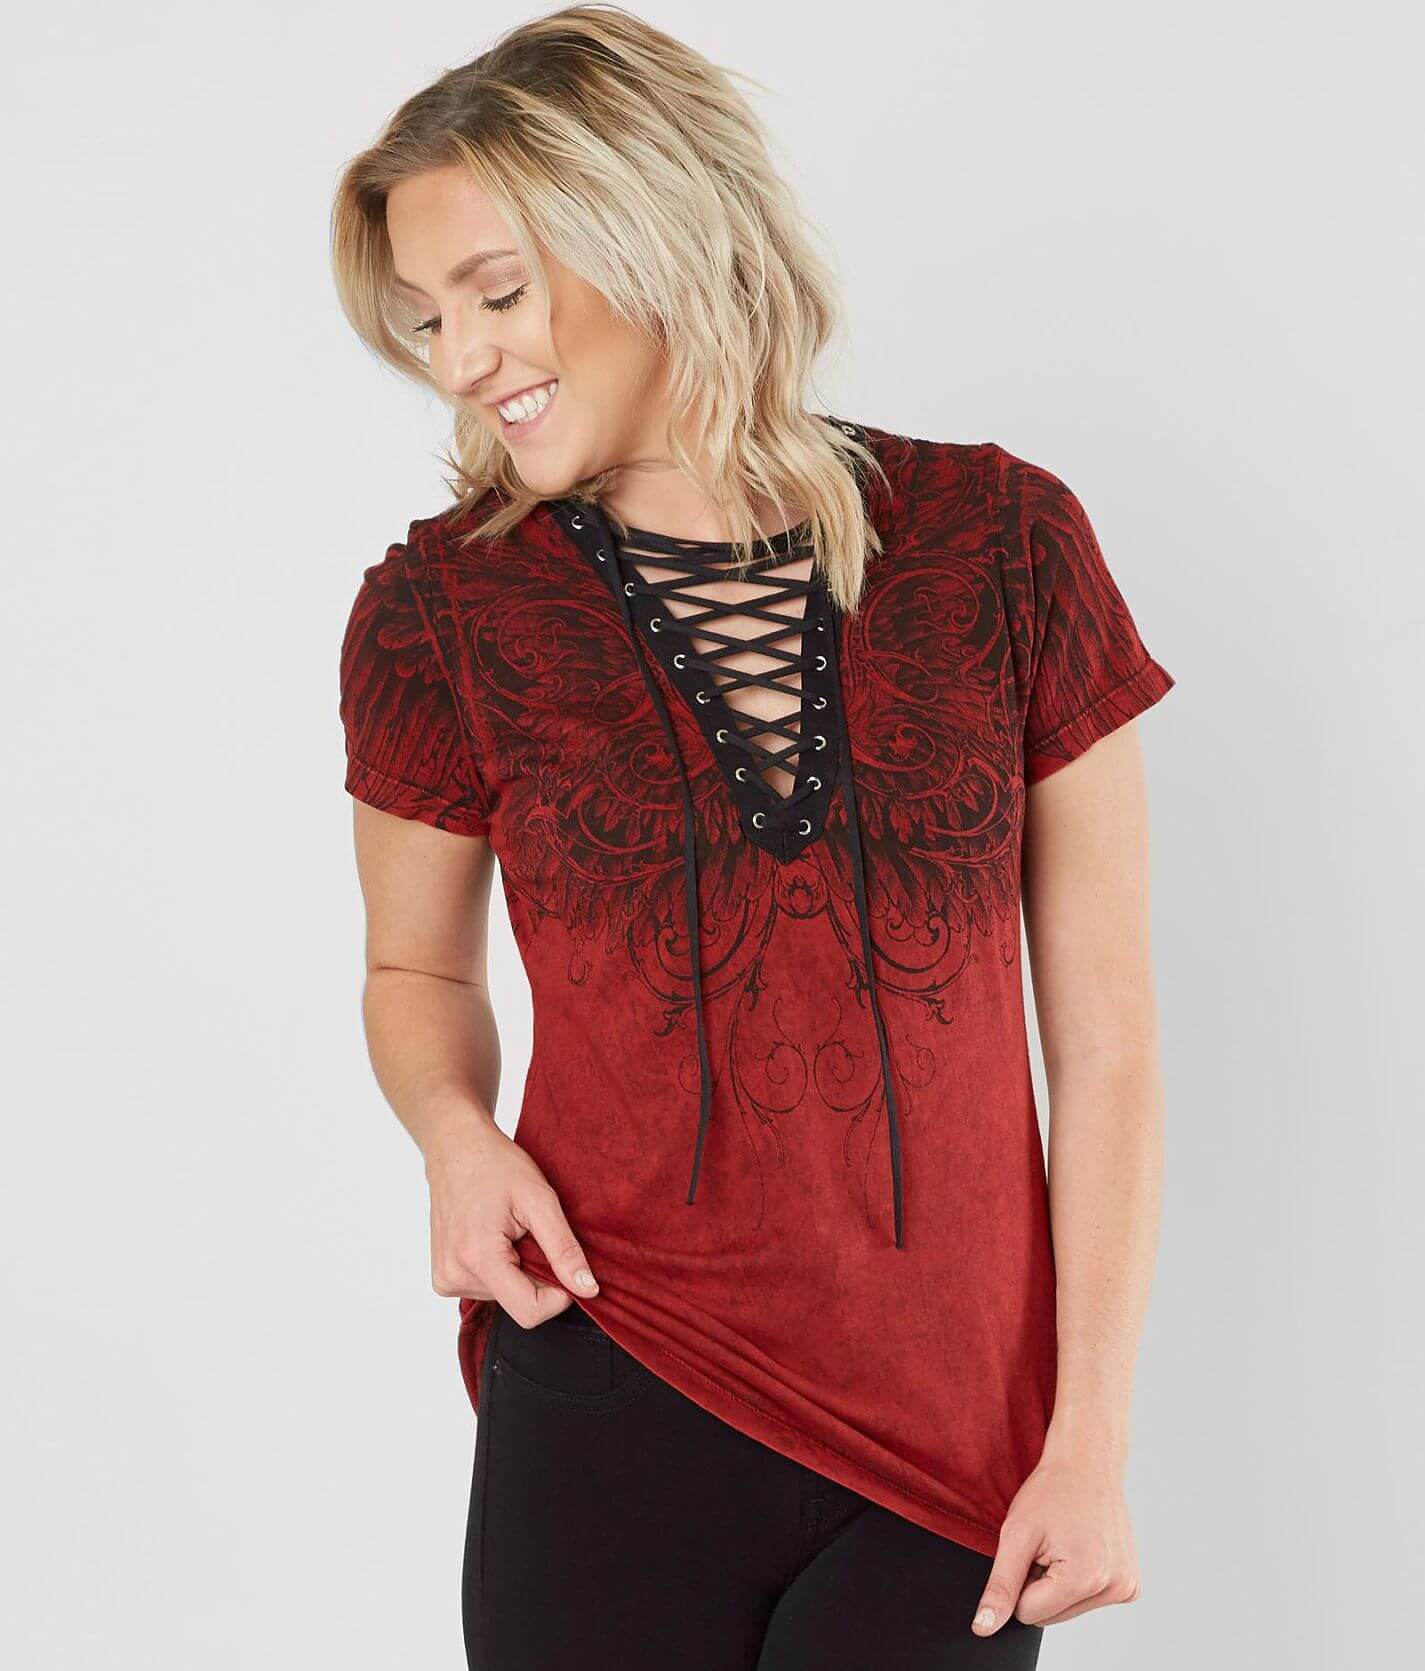 Affliction Chantelle T-Shirt - Women's T-Shirts in Affliction Red Lava Wash